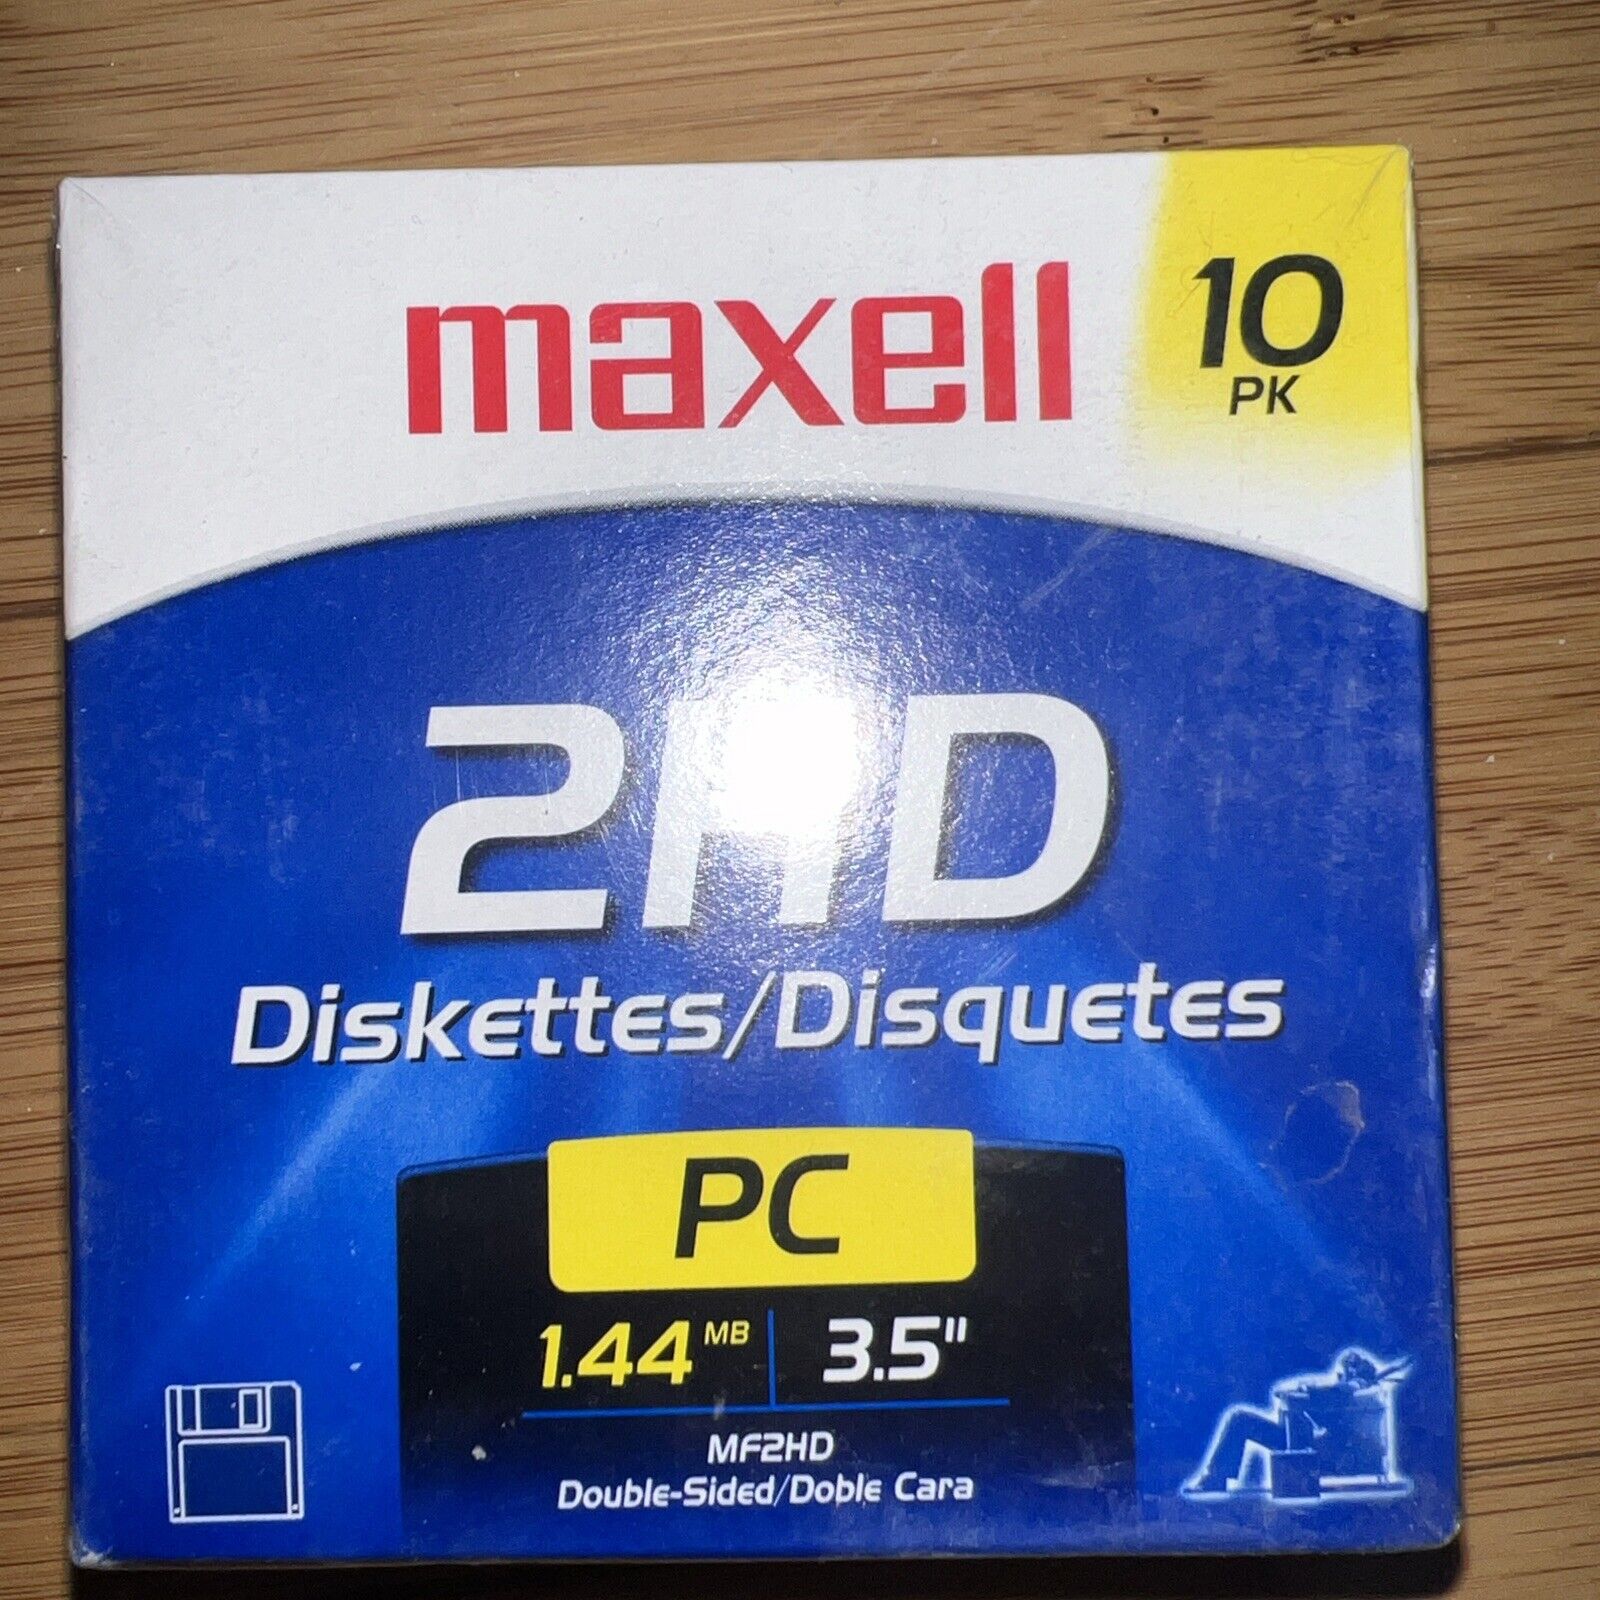 NEW Sealed Maxwell Floppy Disks Diskettes (10 PK)